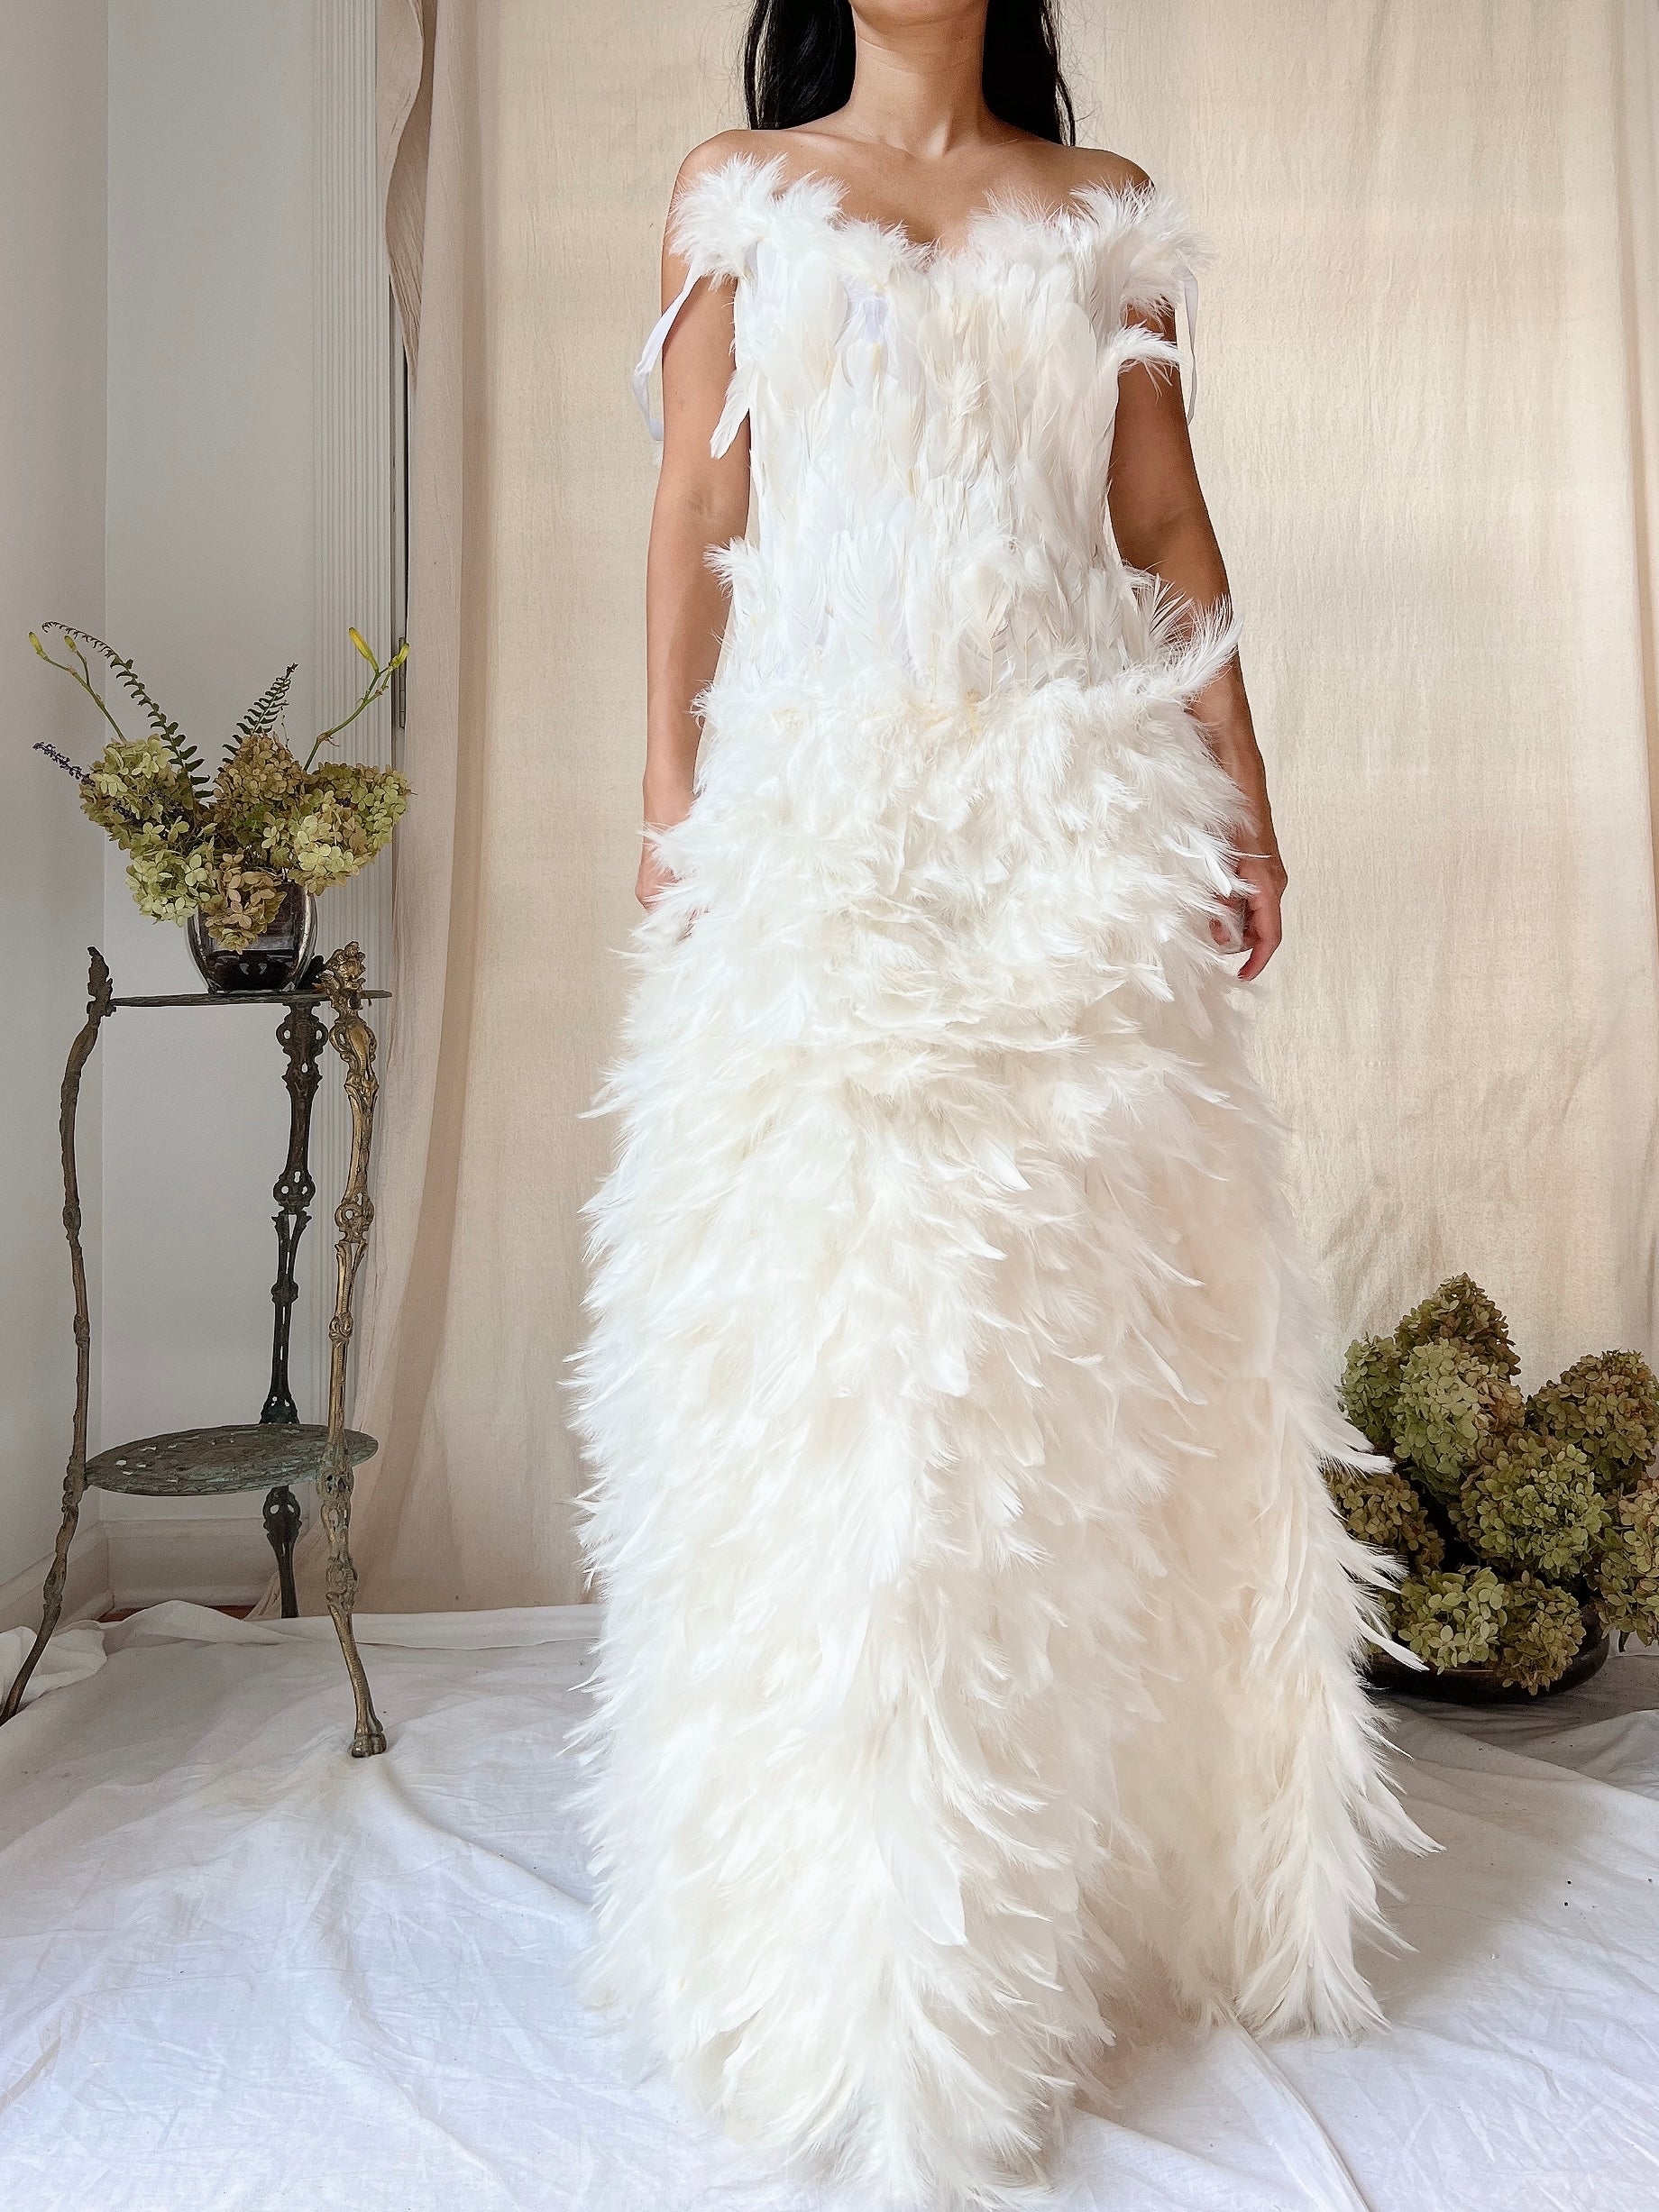 Vintage Ivory Feather Gown - M